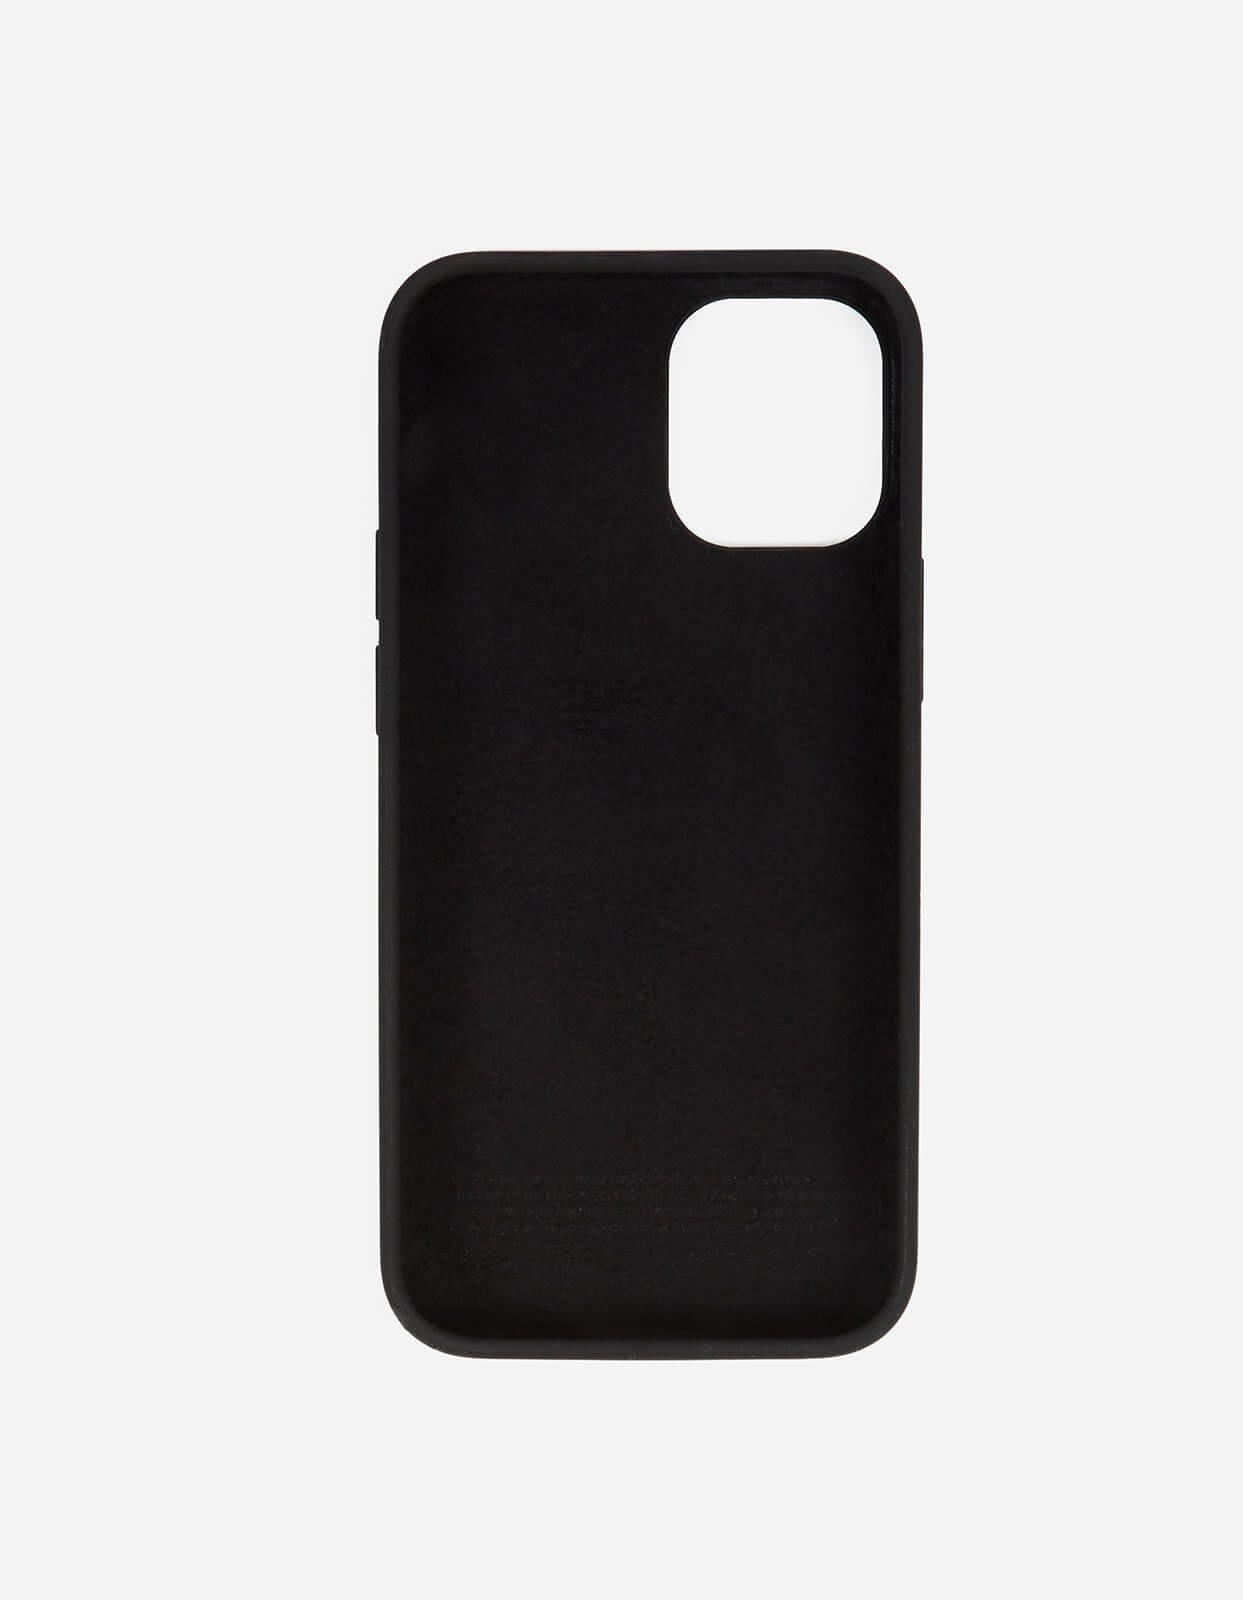 ss21_9353-in-mold-iphone-12-12-pro-case-miltype_black_20